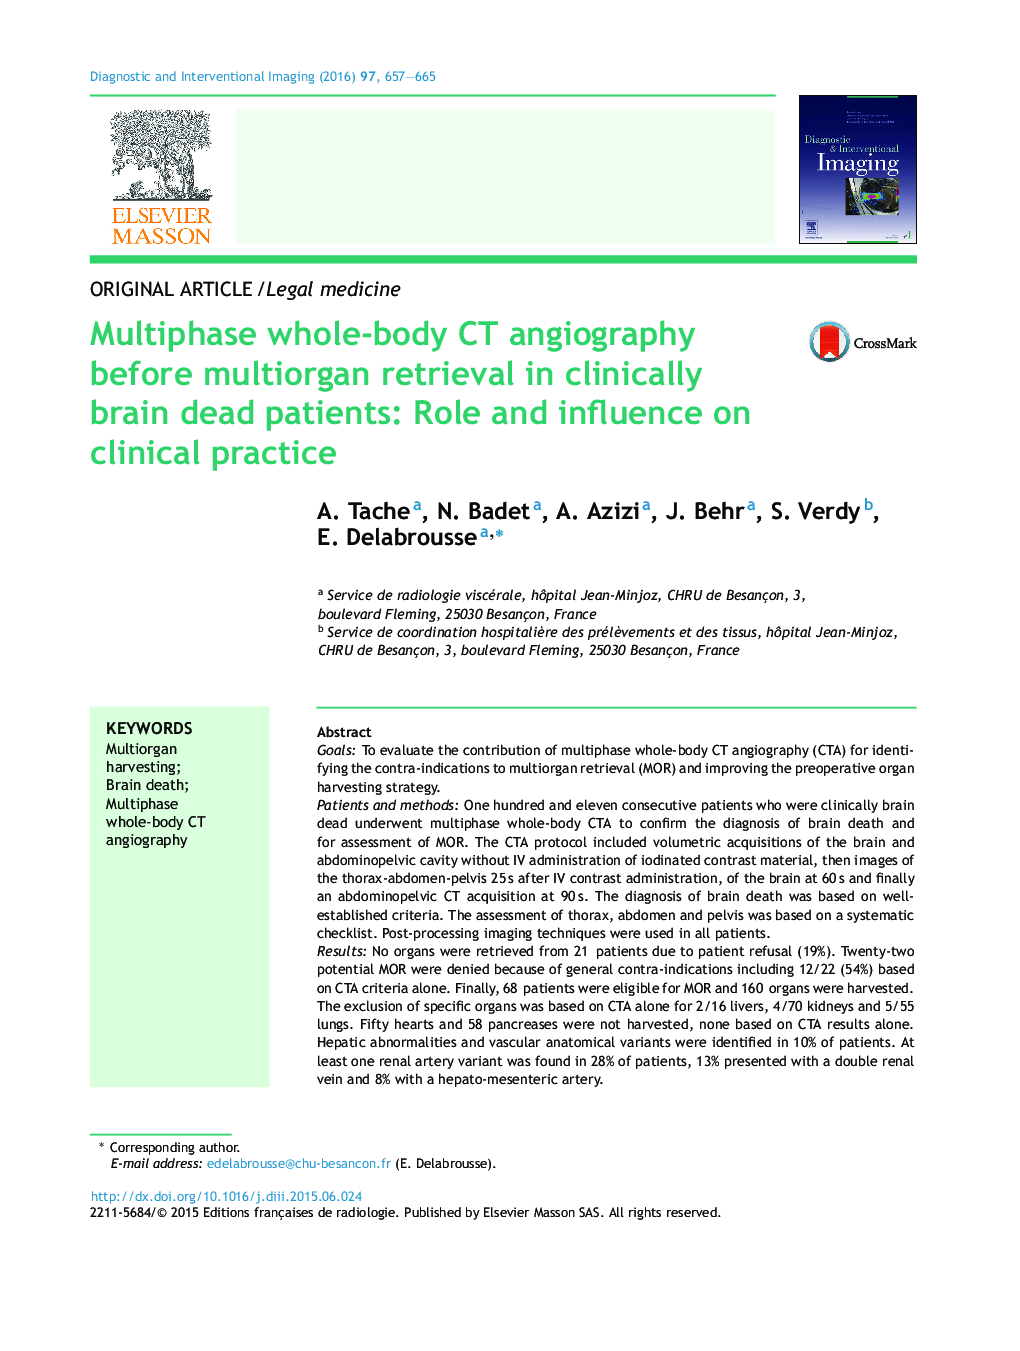 Multiphase whole-body CT angiography before multiorgan retrieval in clinically brain dead patients: Role and influence on clinical practice